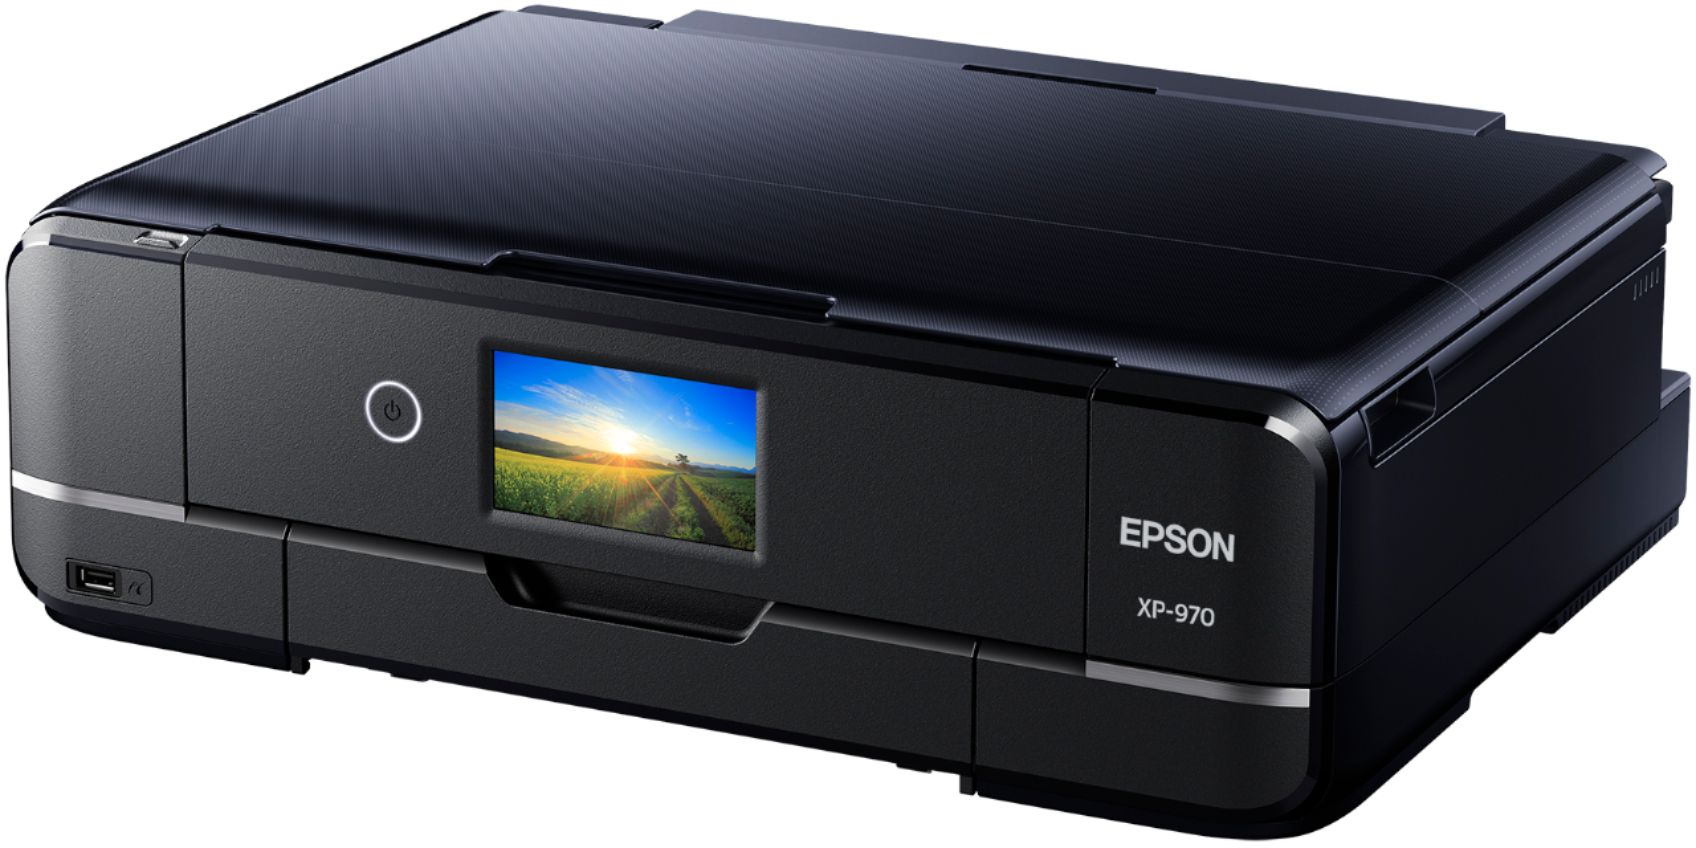 Epson Expression Premium XP-610 Small-in-One Wireless All-In-One Printer  Black/Blue XP-610 - C11CD31201 - Best Buy